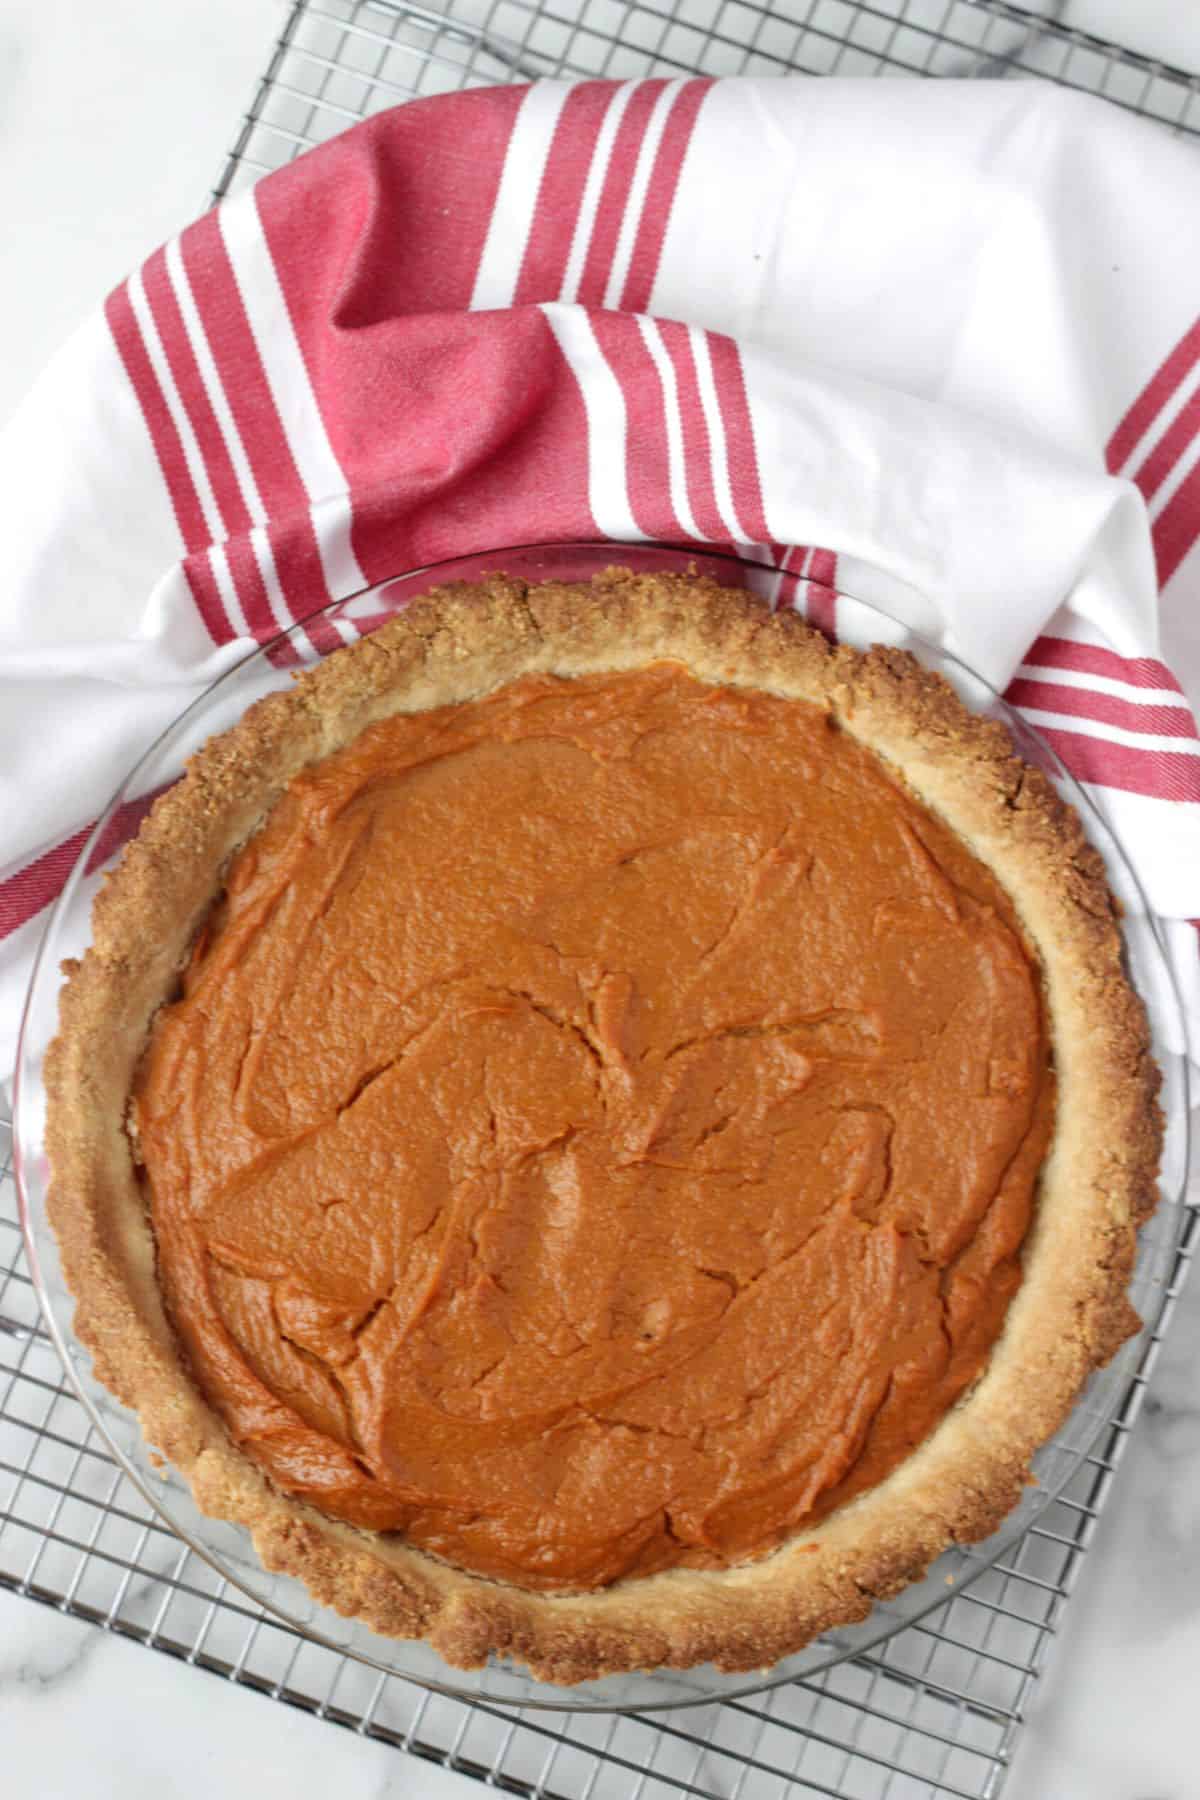 Non-dairy, eggless sweet potato pie in baking dish on cooling rack.